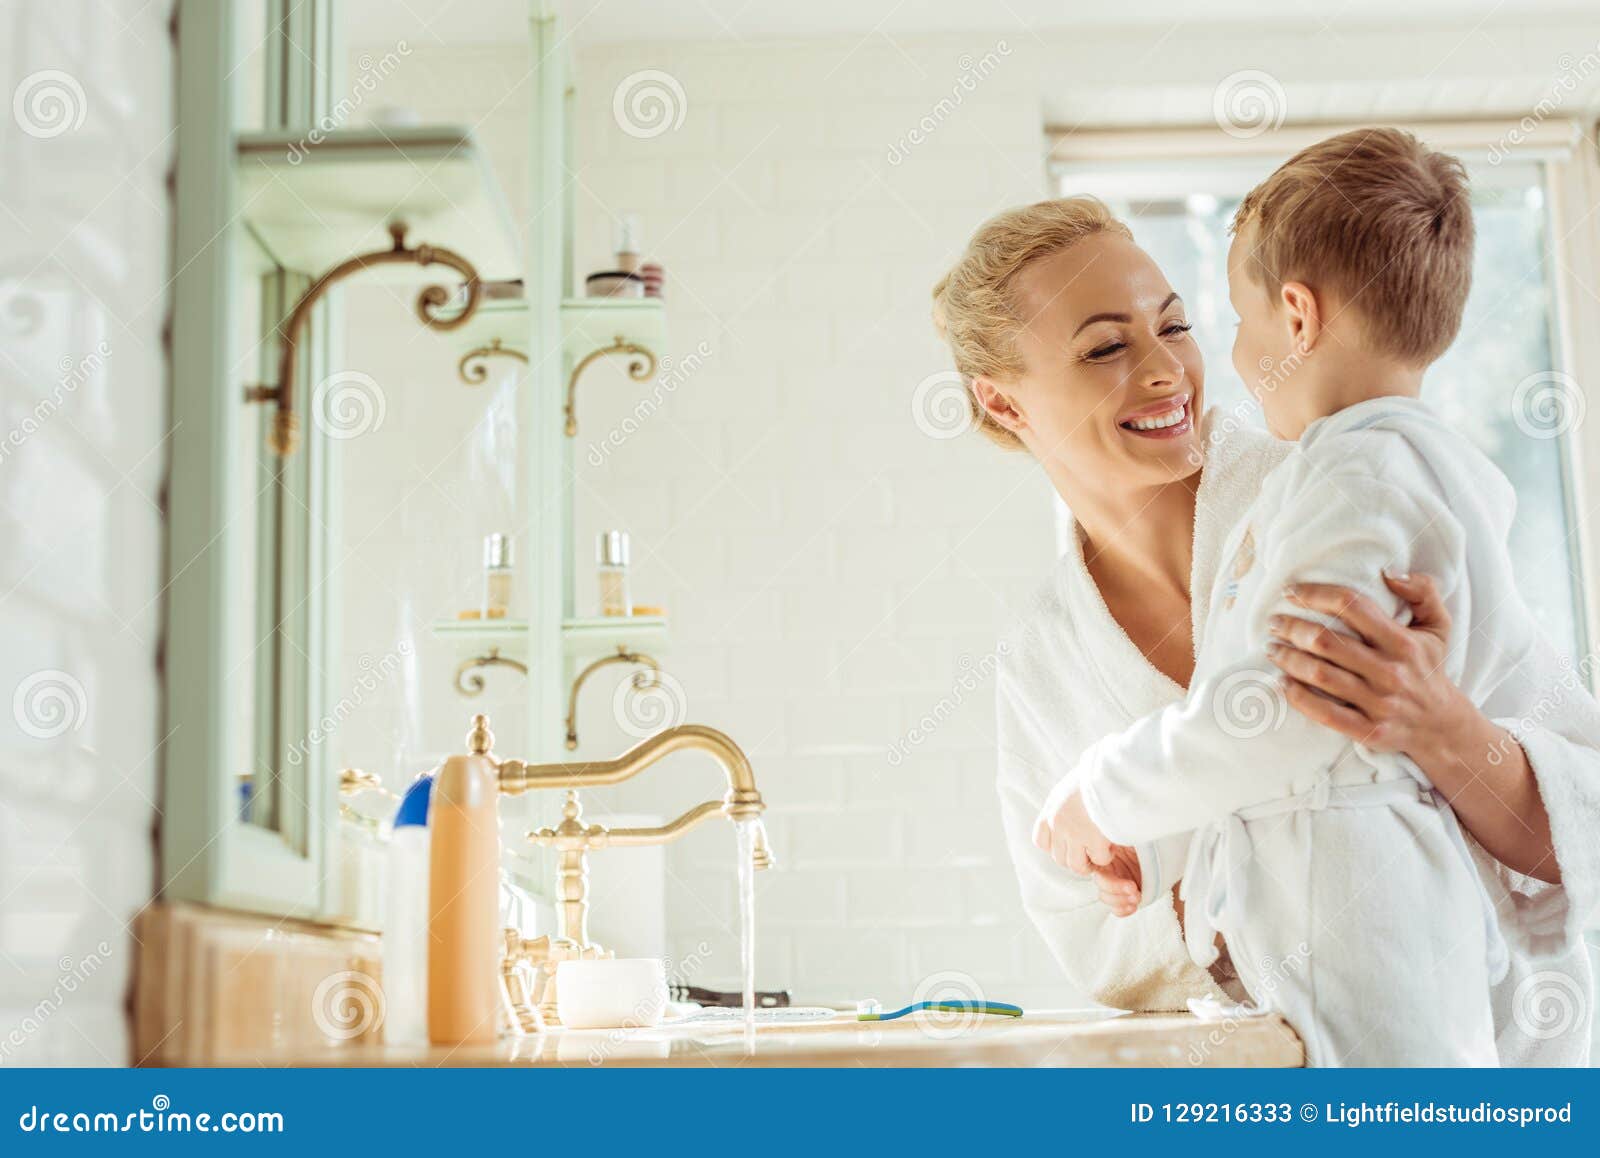 clint shell recommends Mom And Son Bathroom